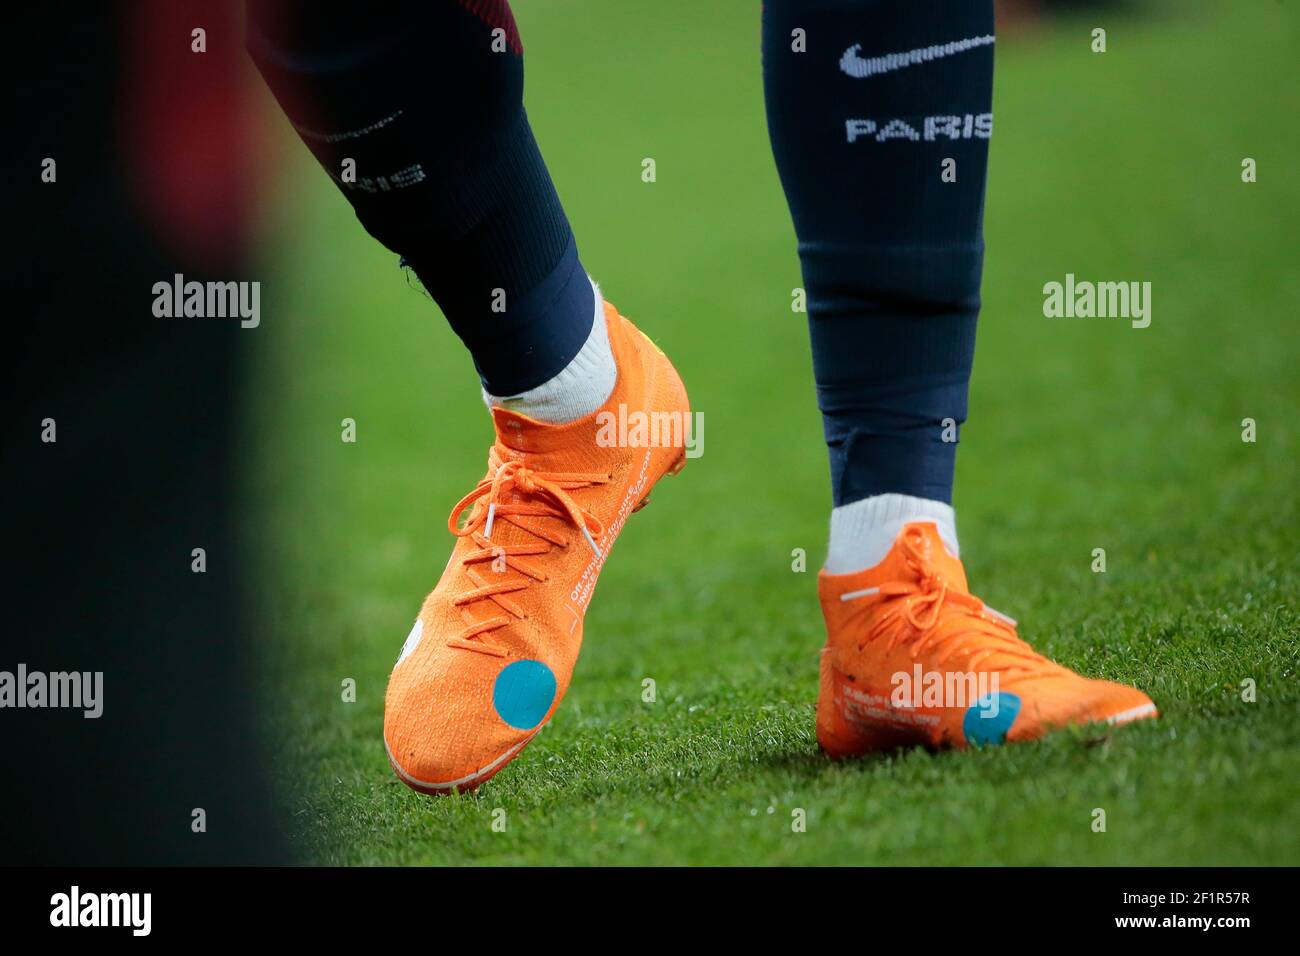 Shoes of Kylian Mbappe (PSG), ™ for 'Nike Mercurial Vapore' Oregon USA c. 'KNIT', during the French championship L1 football match between Paris Saint-Germain (PSG) and Monaco, on